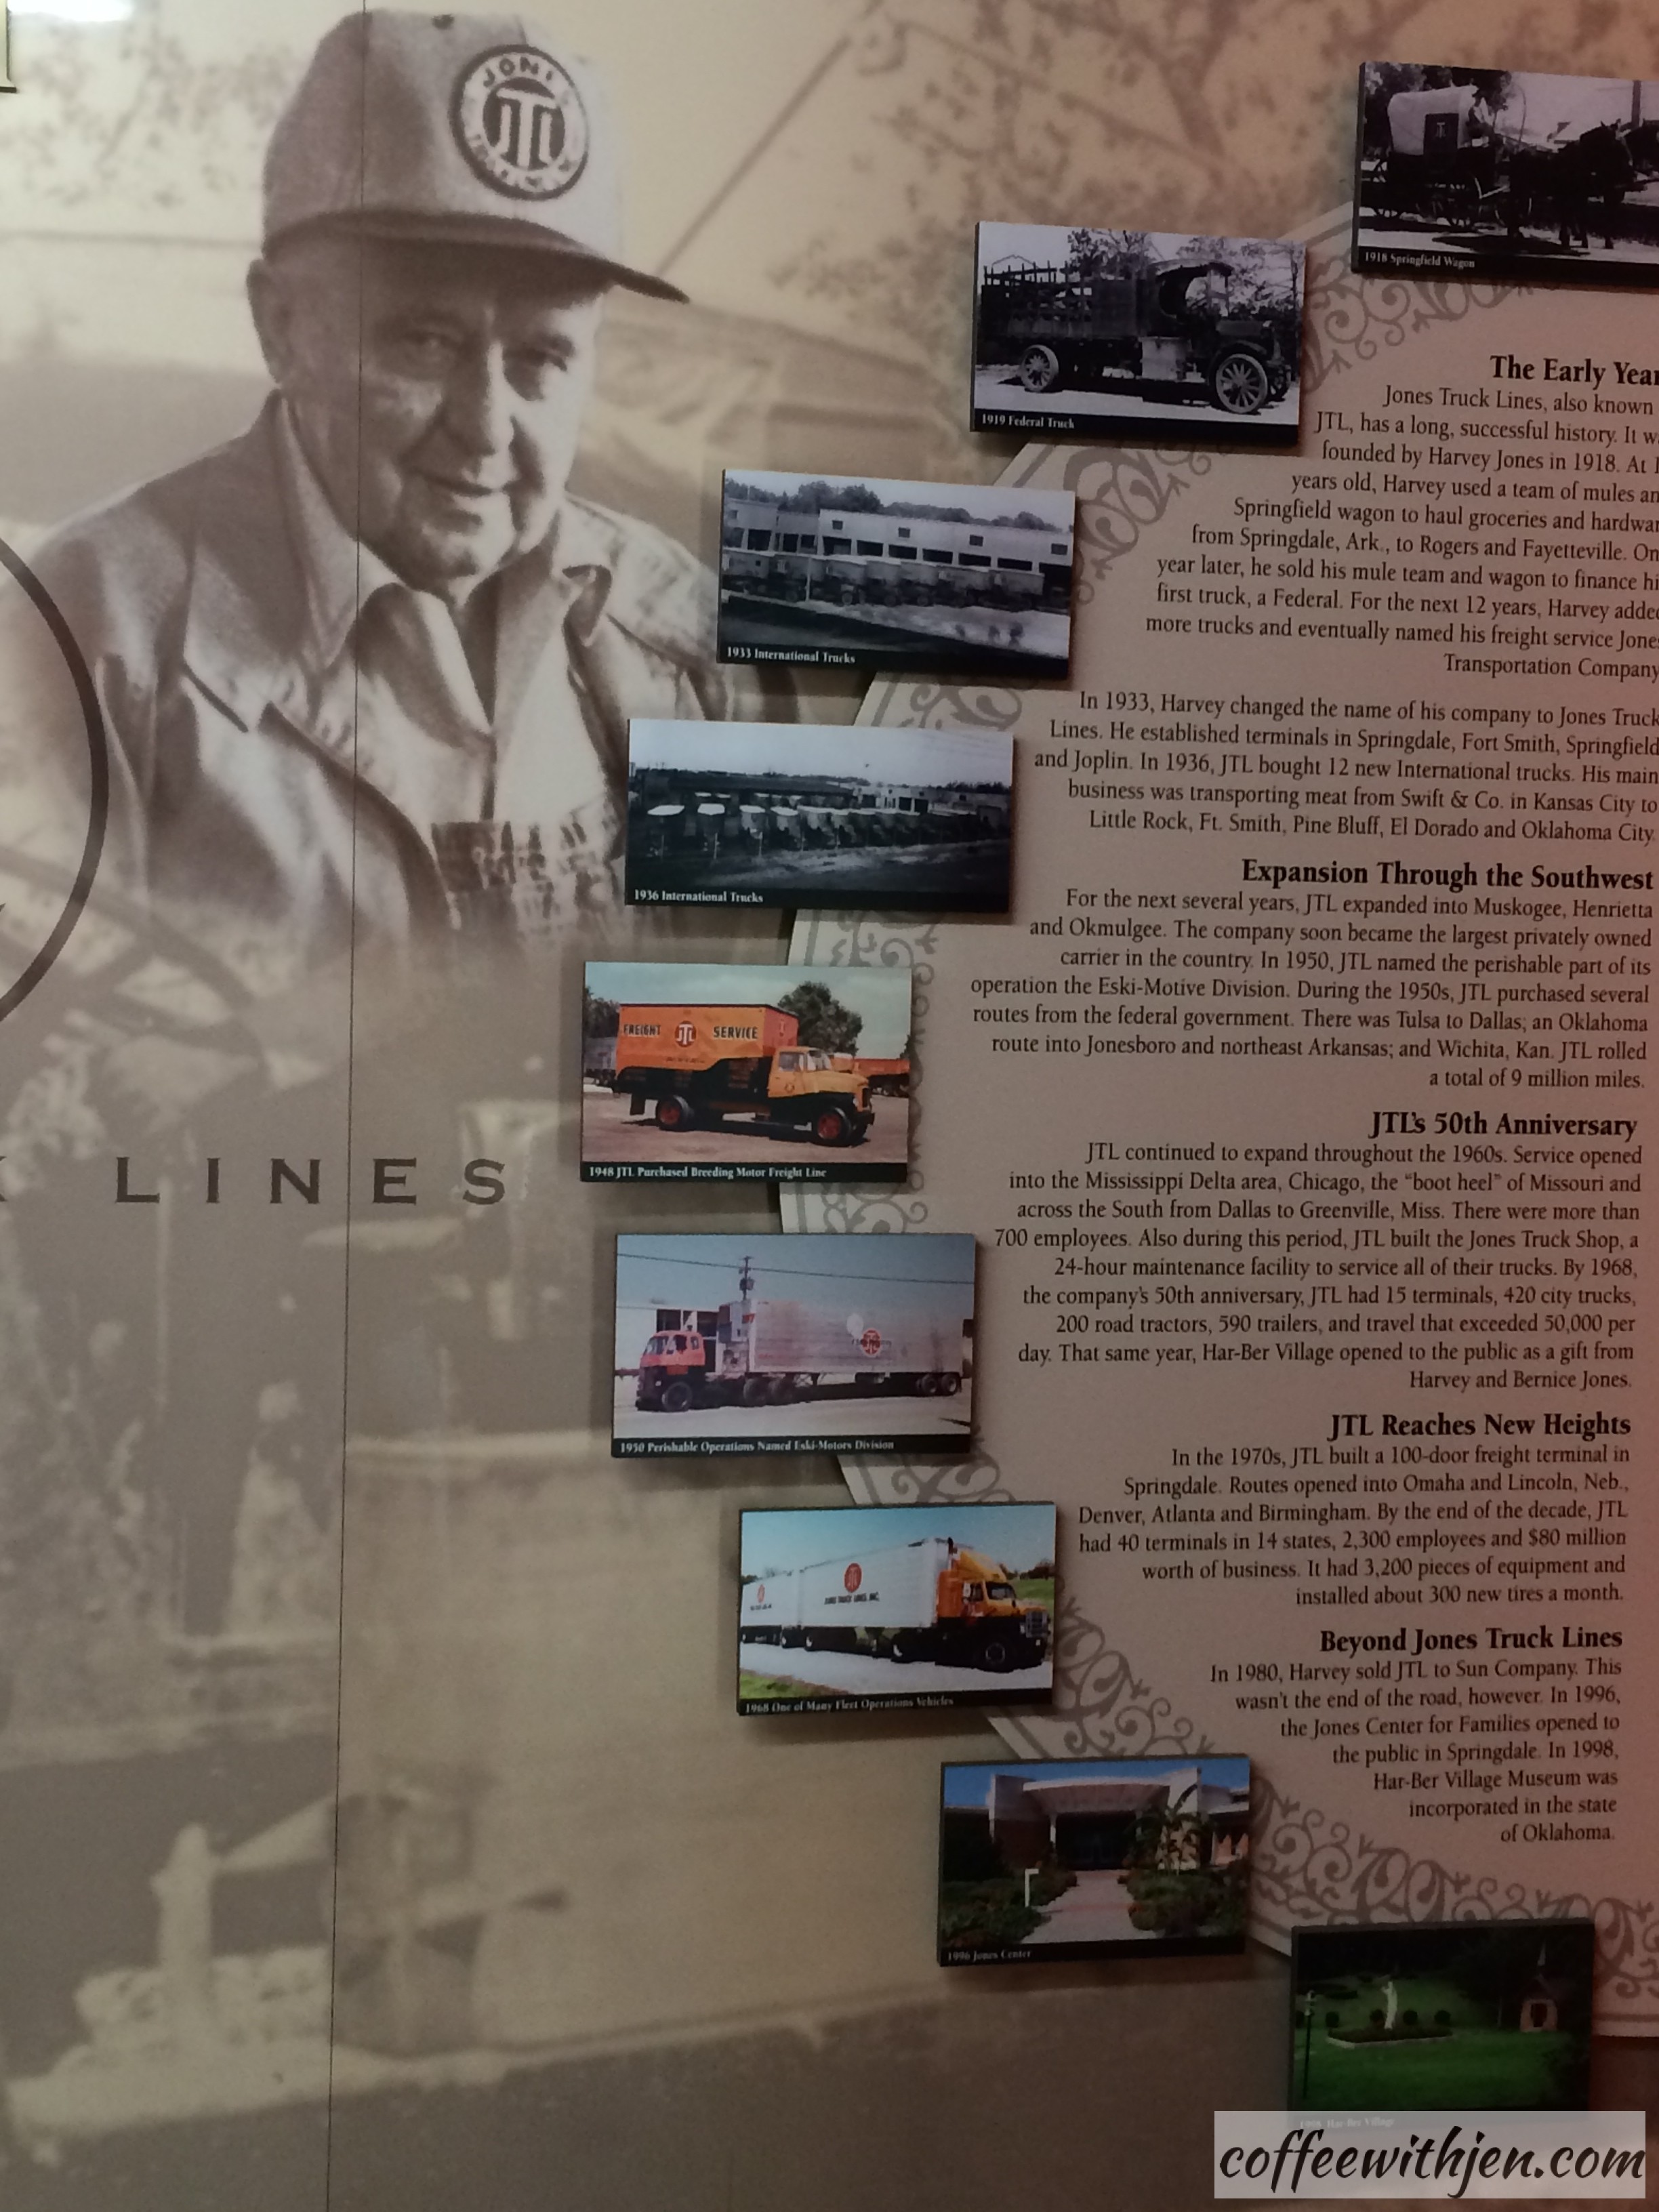 This is a short timeline of the history of Mr. Jones's business.  What a testament to hard work and the American Dream! 